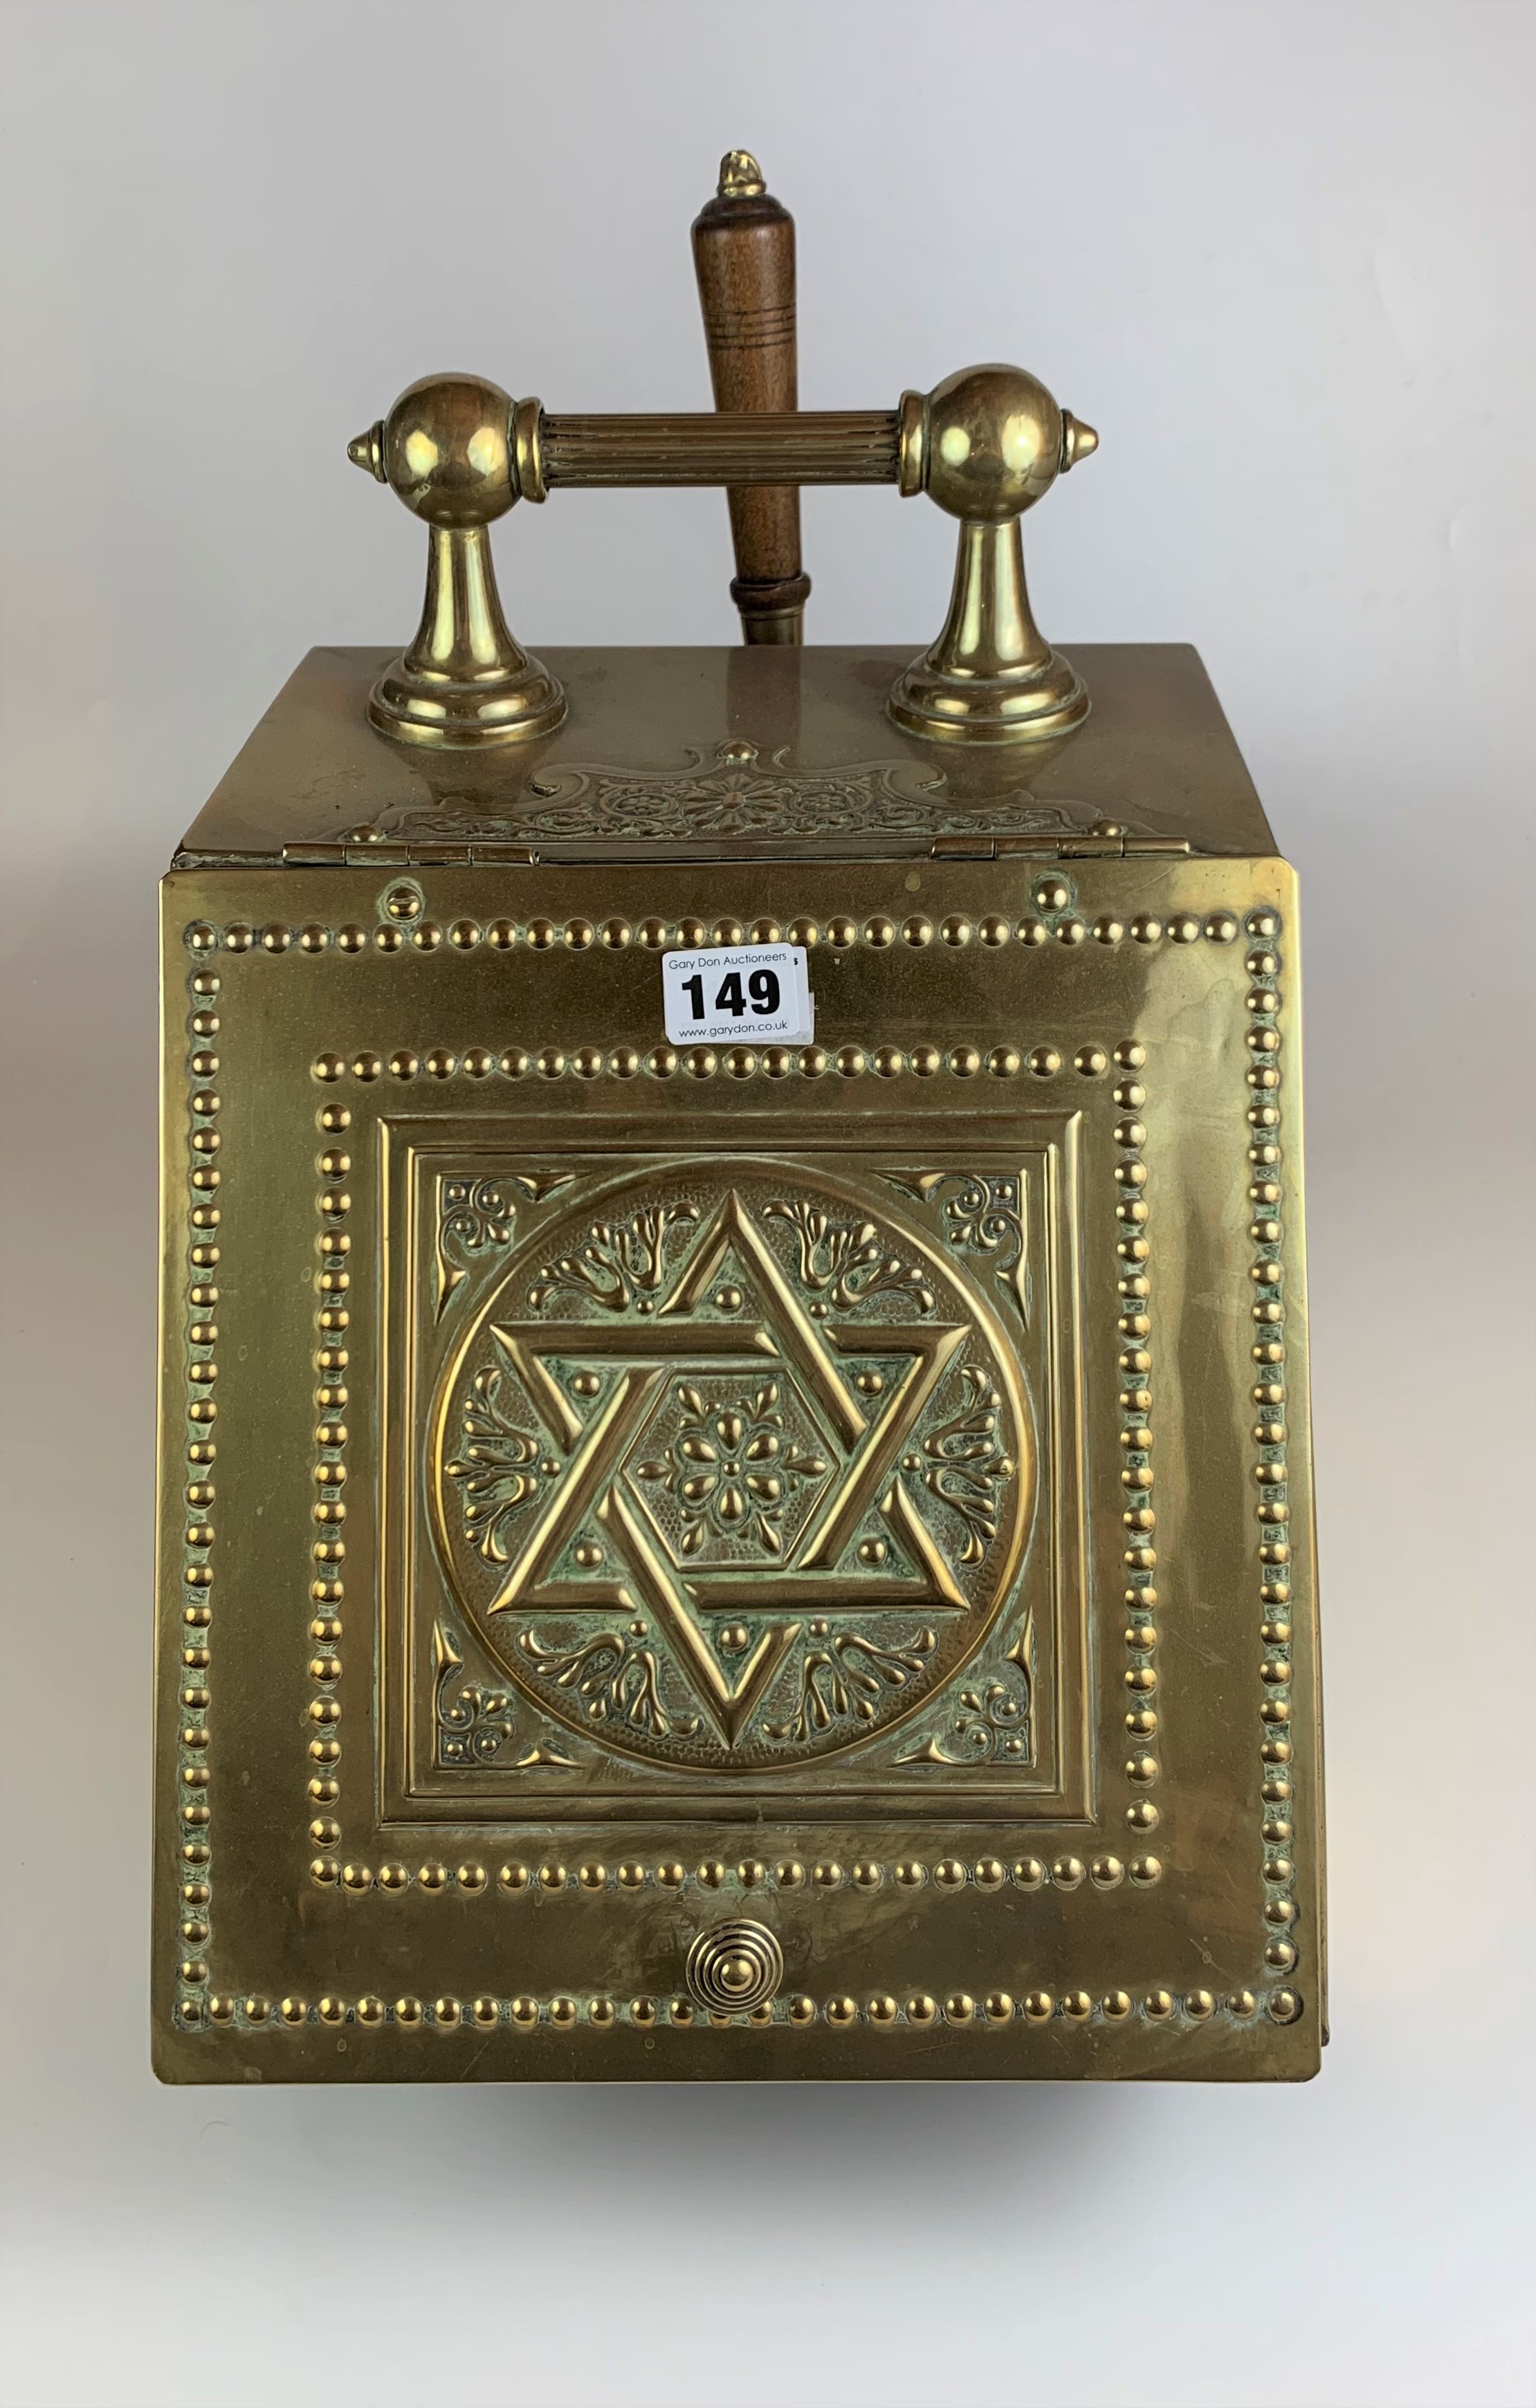 Brass coal box with Star of David design and shovel. 11” long x14” wide x 17” high. Some damage